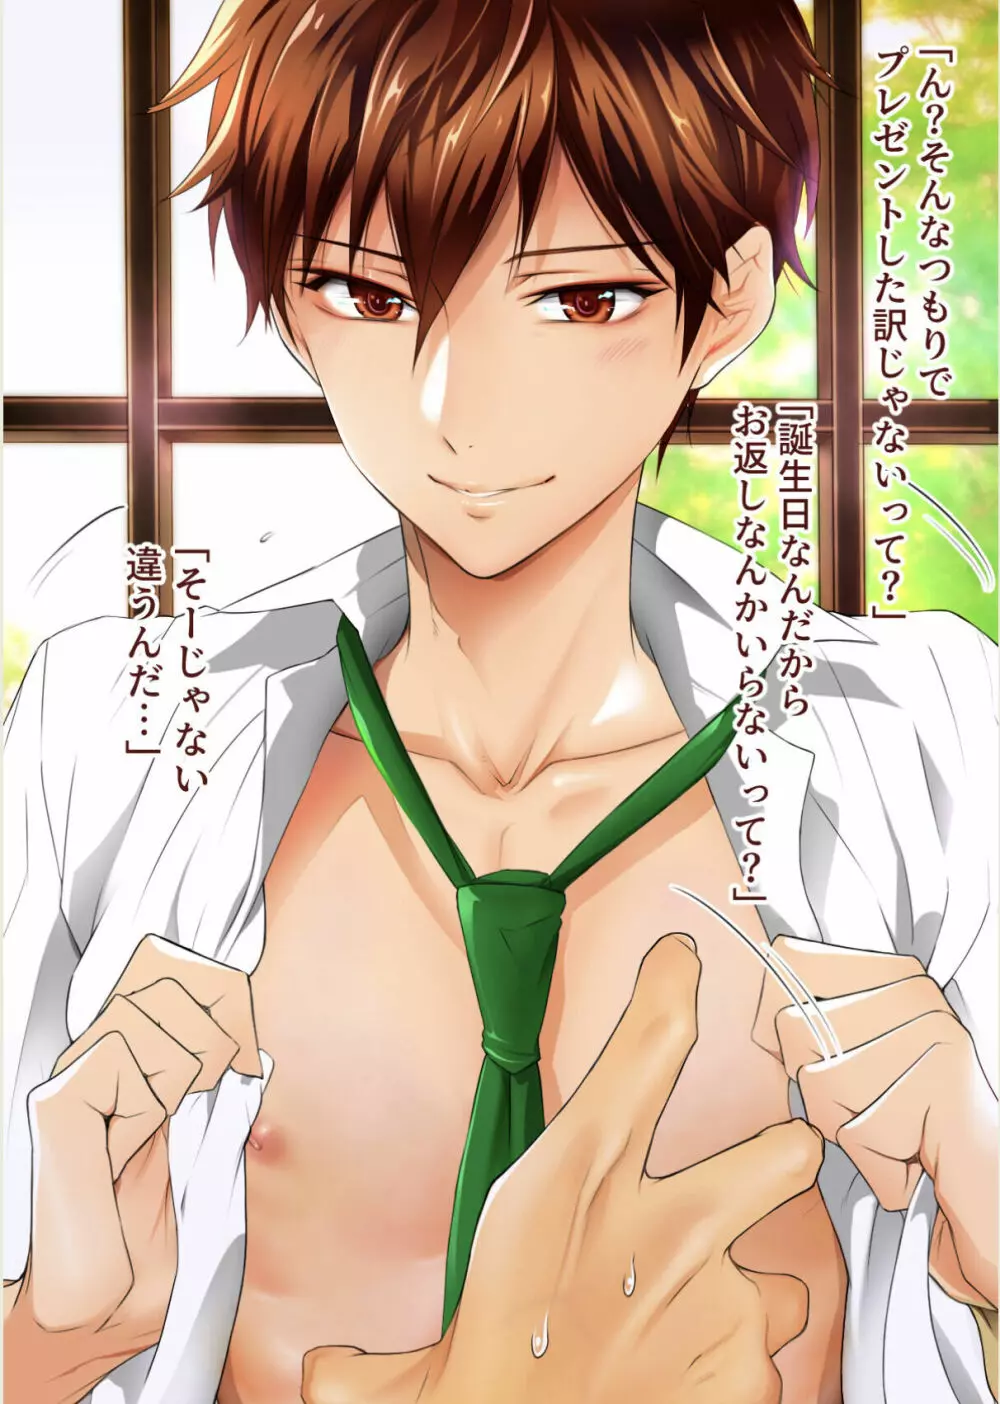 chiaki morisawa is hot and i want him inside me - page16